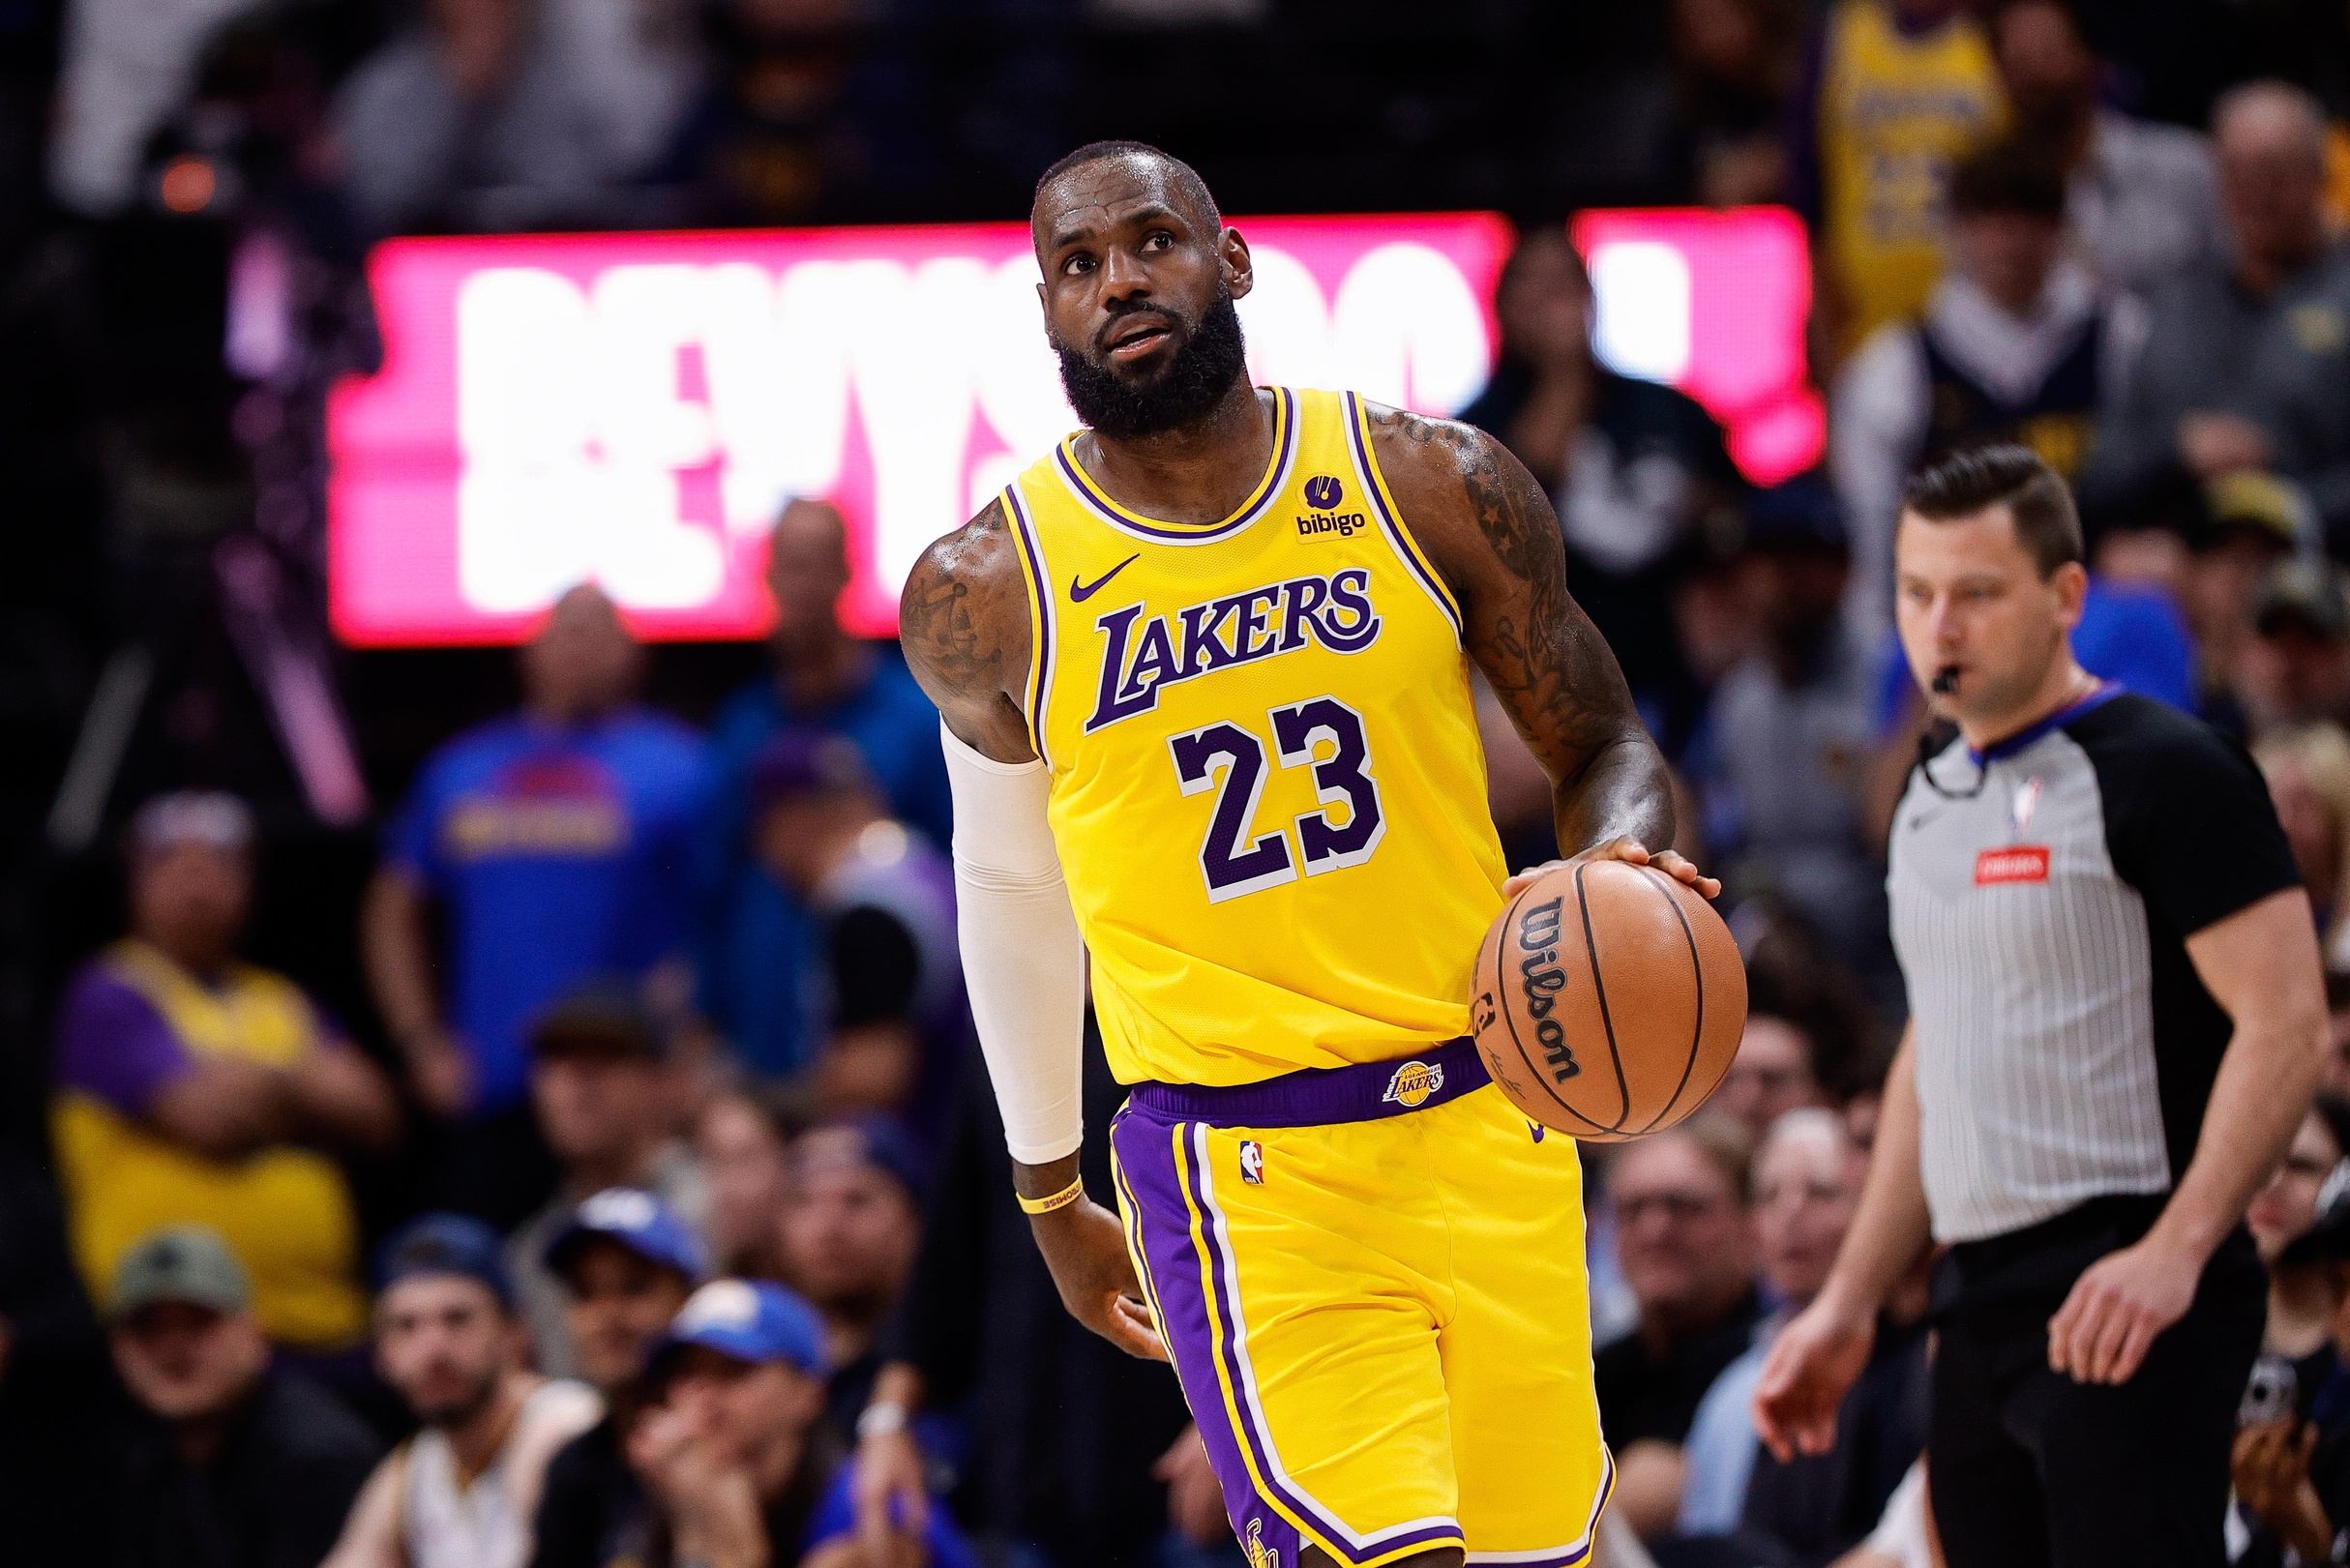 LeBron James Remains Noncommittal on Future with Lakers After Intense Playoff Defeat